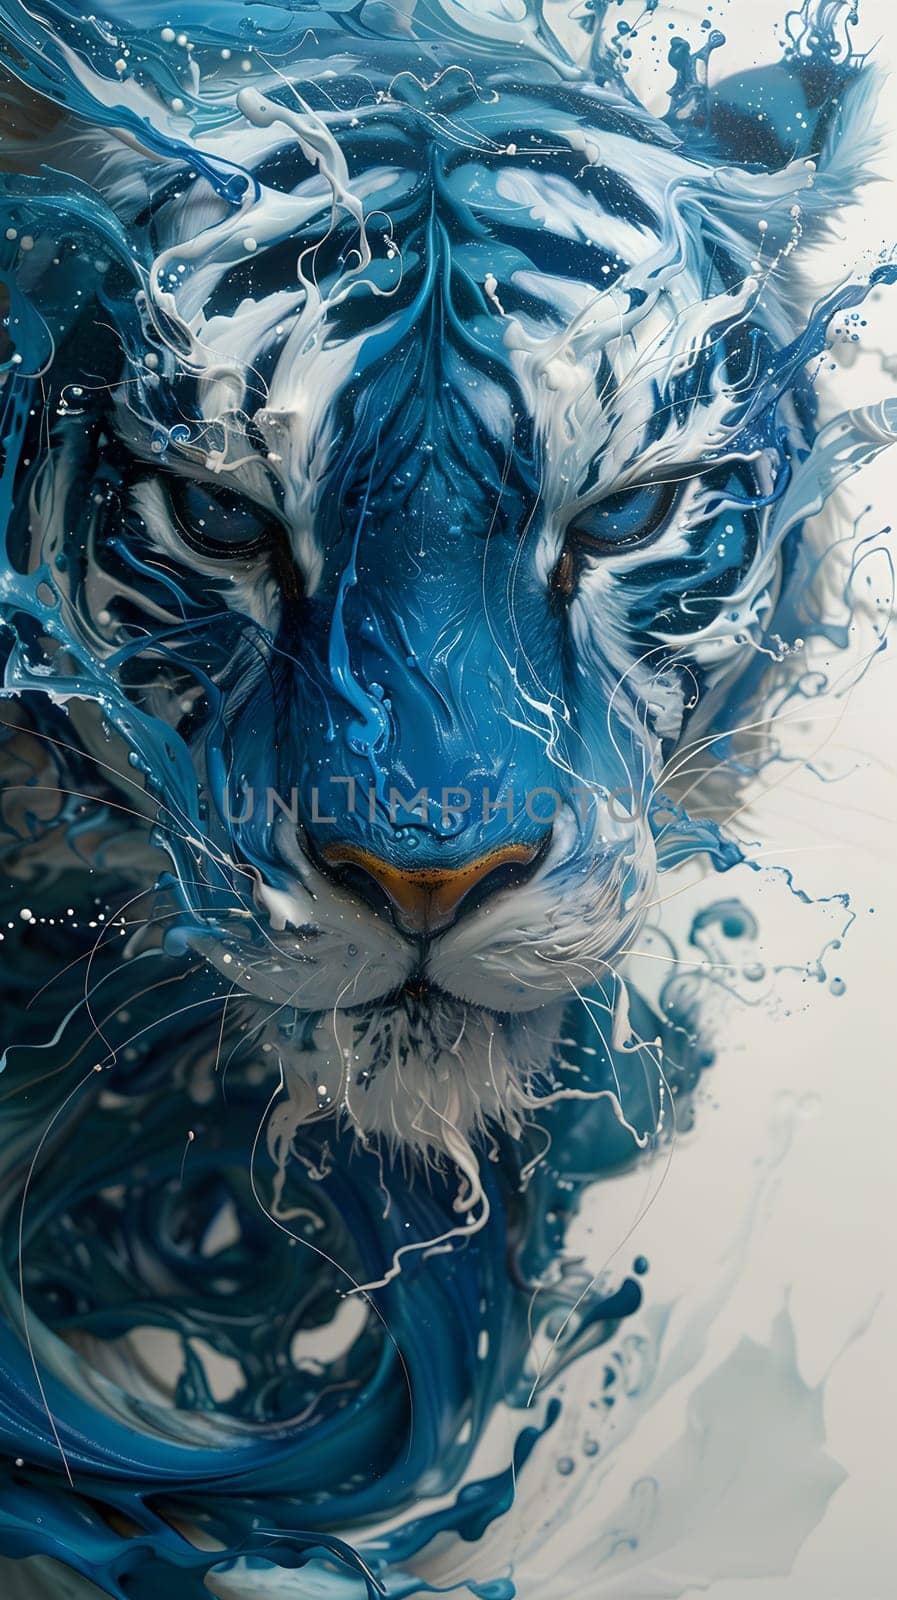 a painting of a blue and white tiger in the water by Nadtochiy